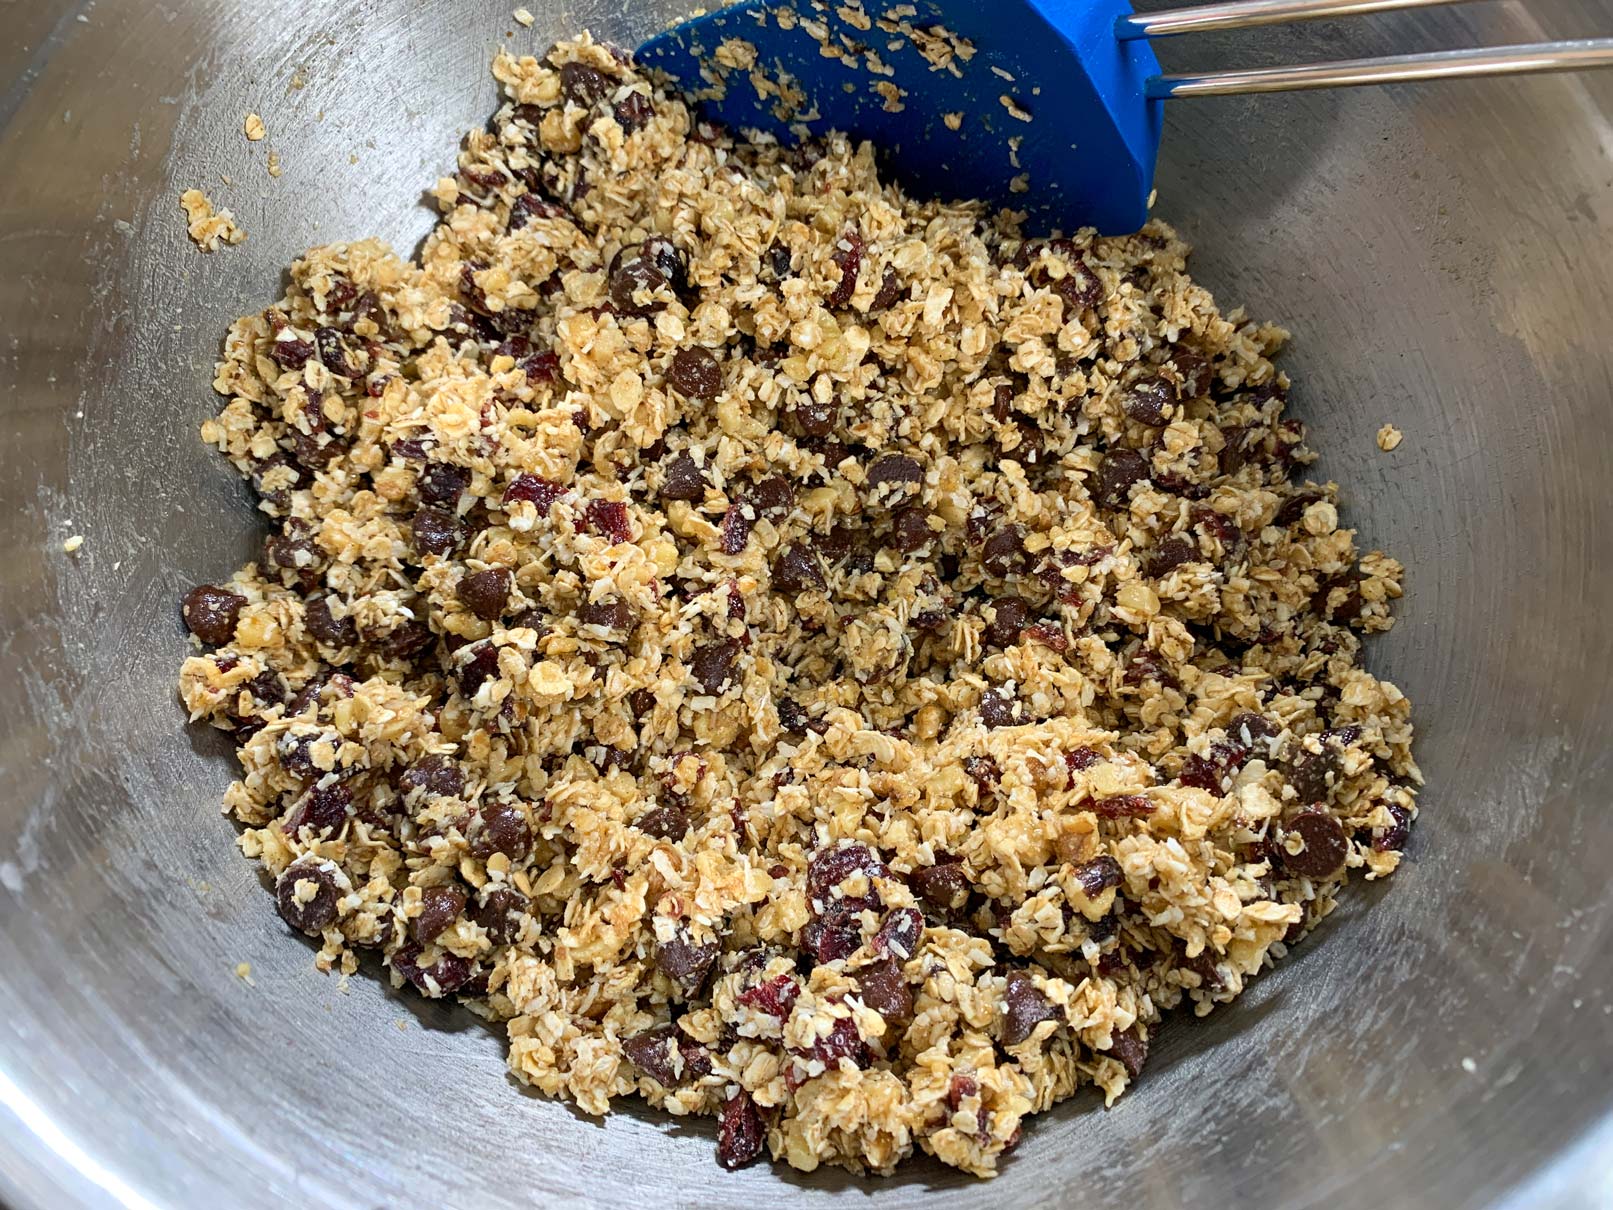 The granola bar mixture all mixed together in a bowl